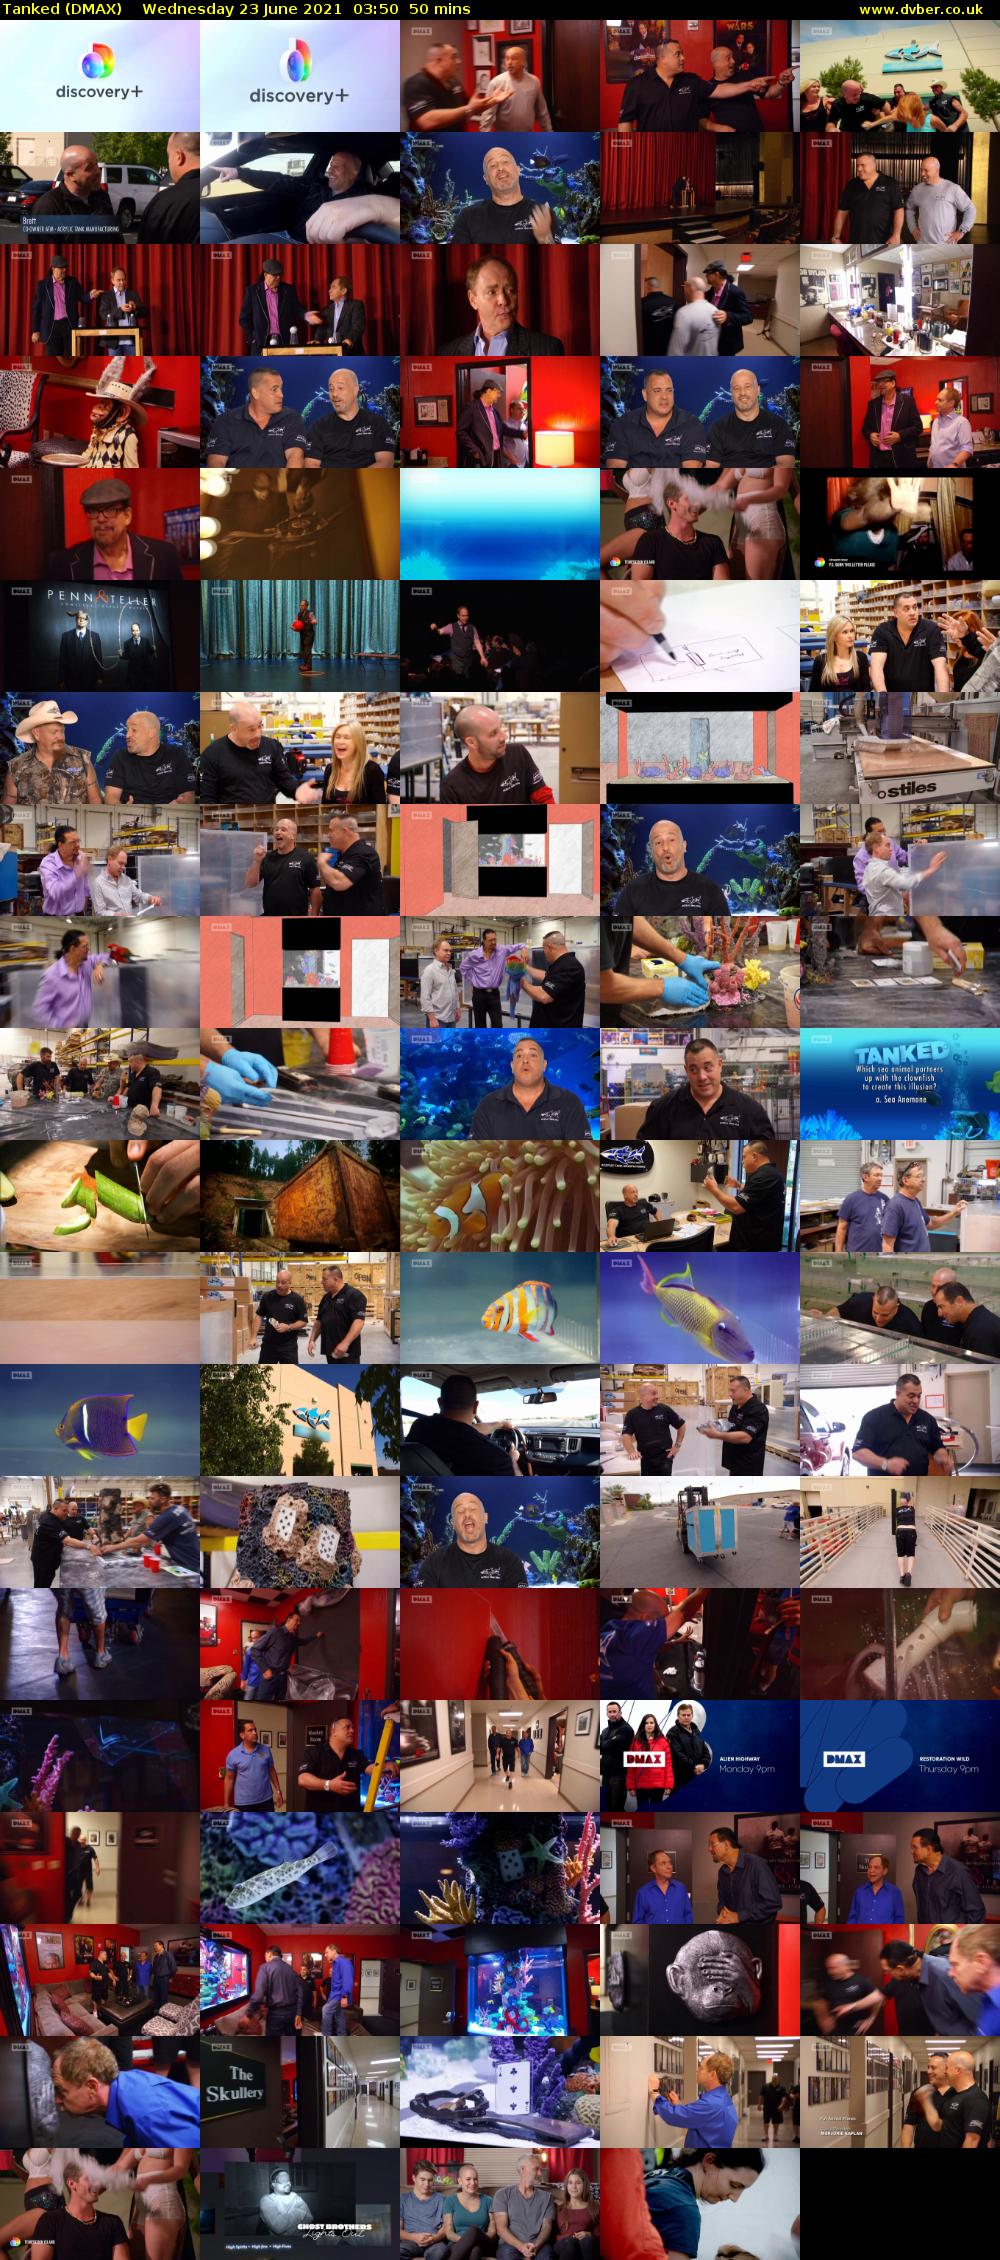 Tanked (DMAX) Wednesday 23 June 2021 03:50 - 04:40